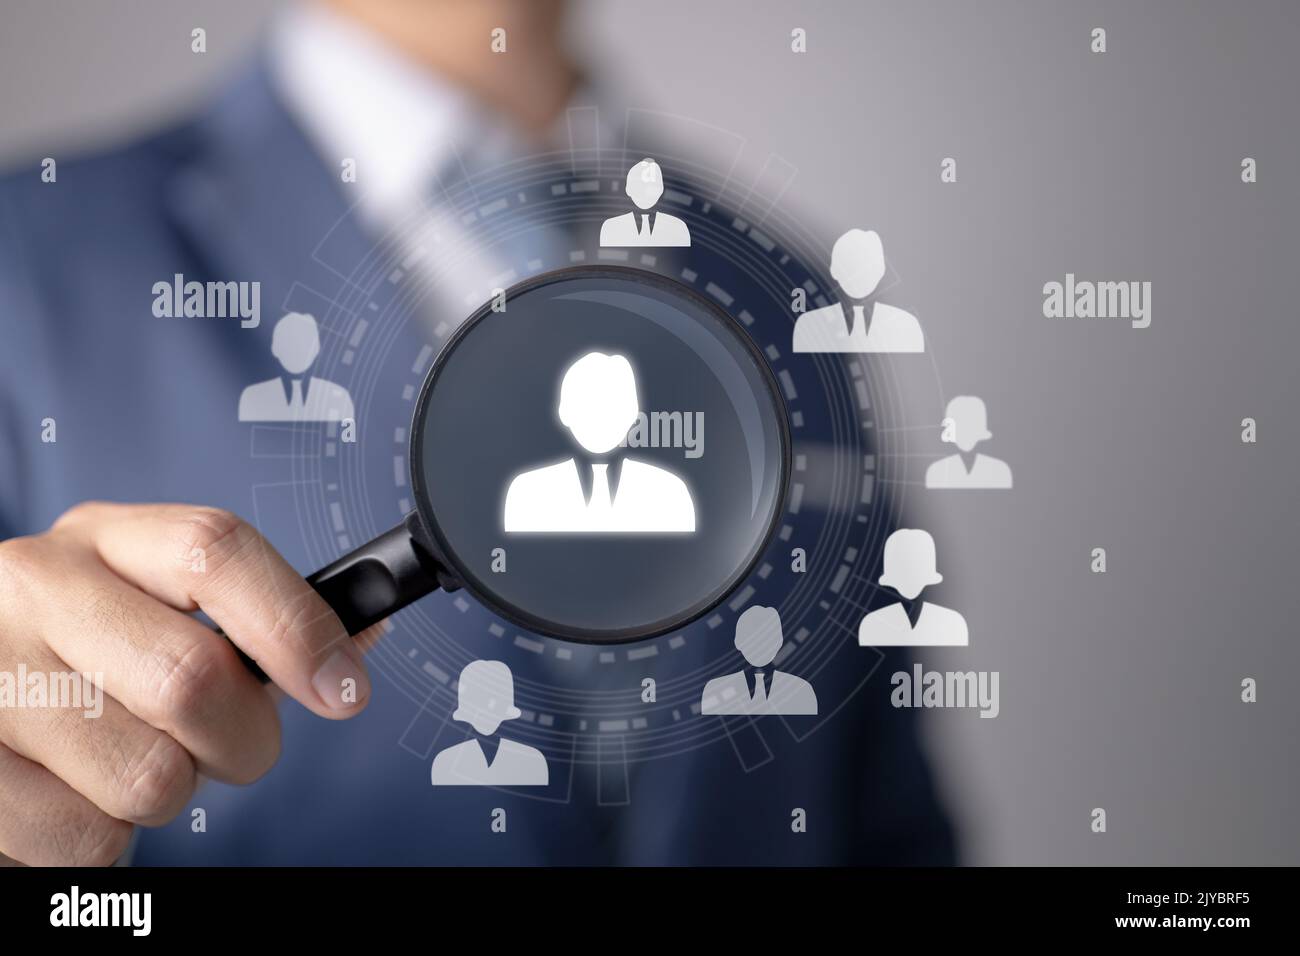 Headhunting, Recruitment, and Human Resource Management are all terms used to describe the process of selecting leaders or employees. Stock Photo